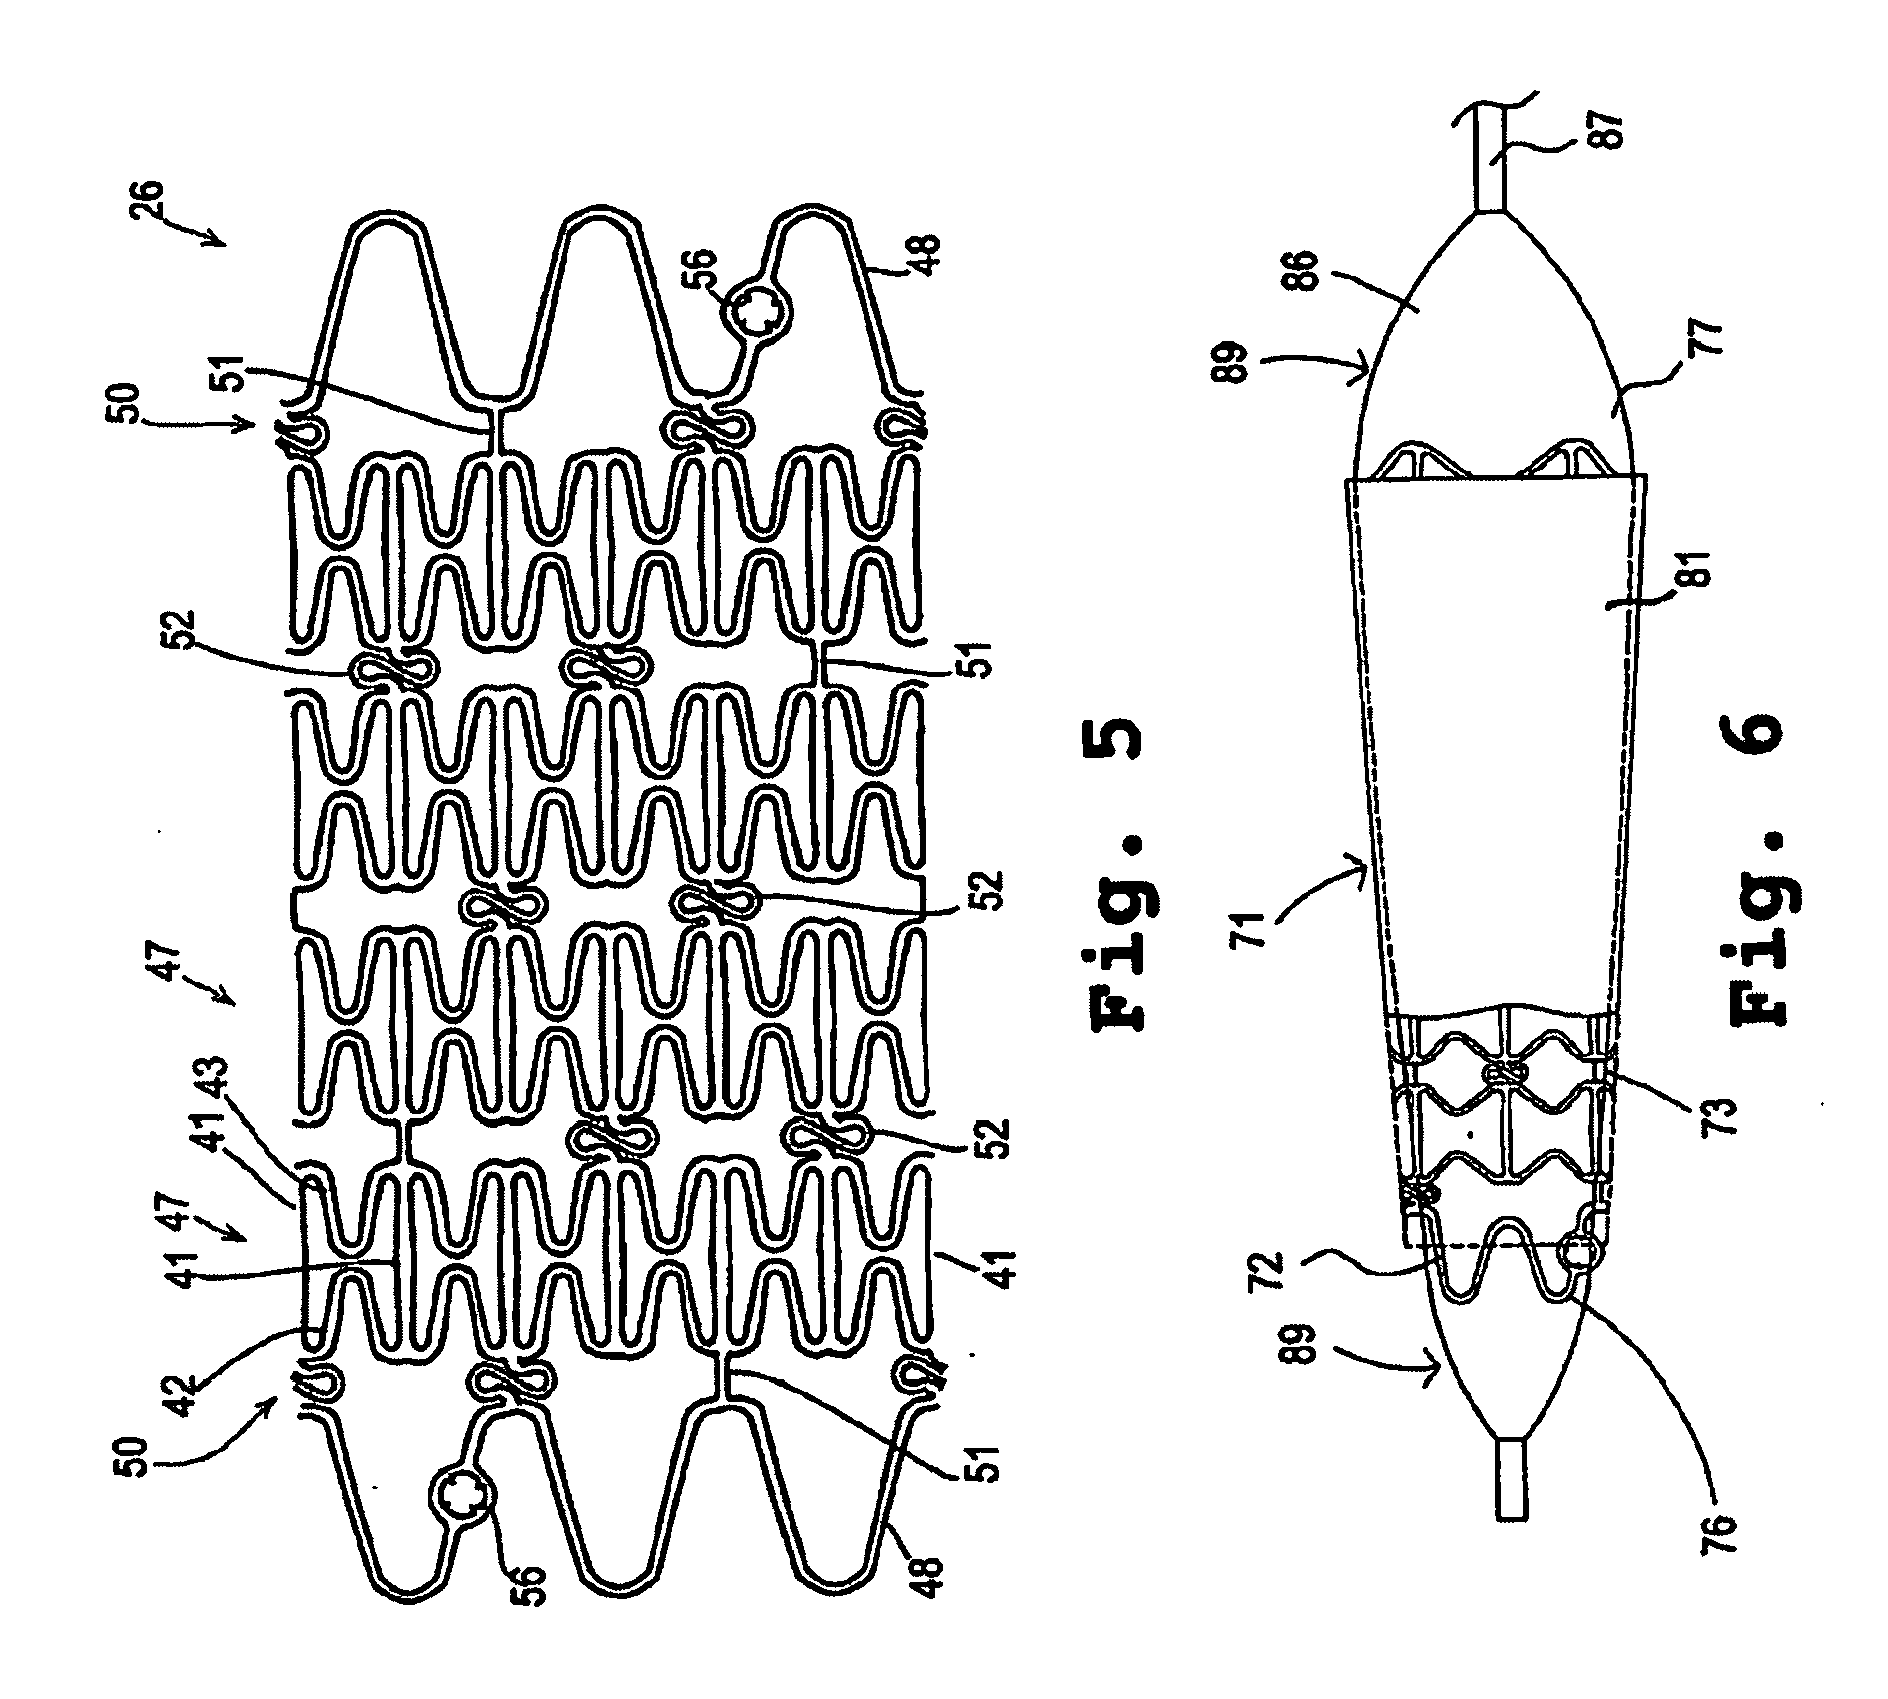 Composite stent with polymeric covering and bioactive coating